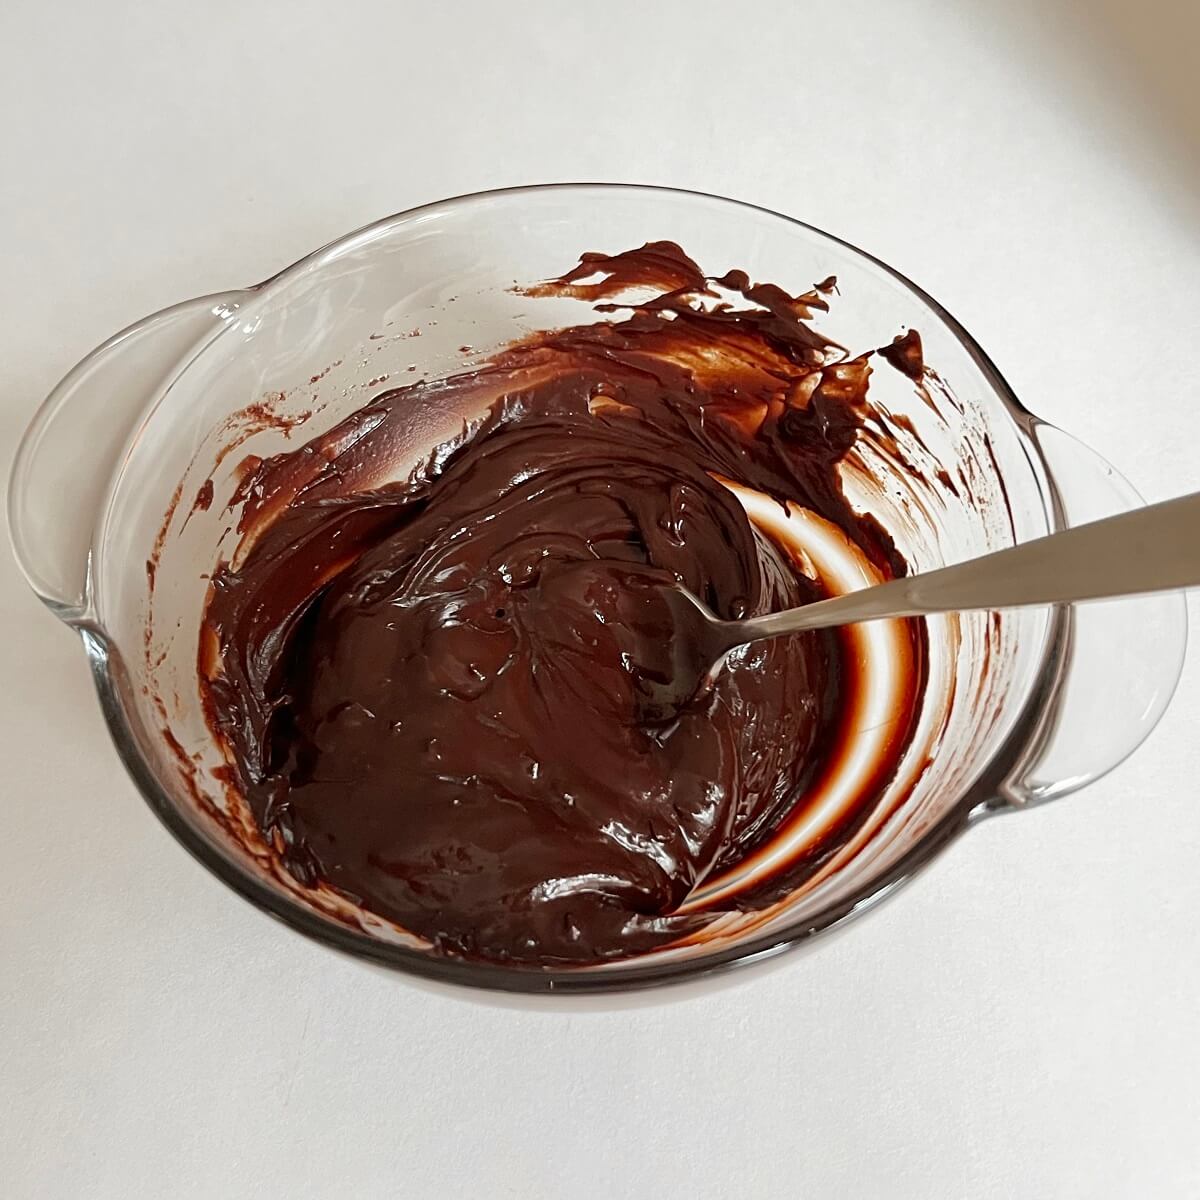 A liquid mixture of melted chocolate and lime zest and juice in a glass bowl with a metal spoon.